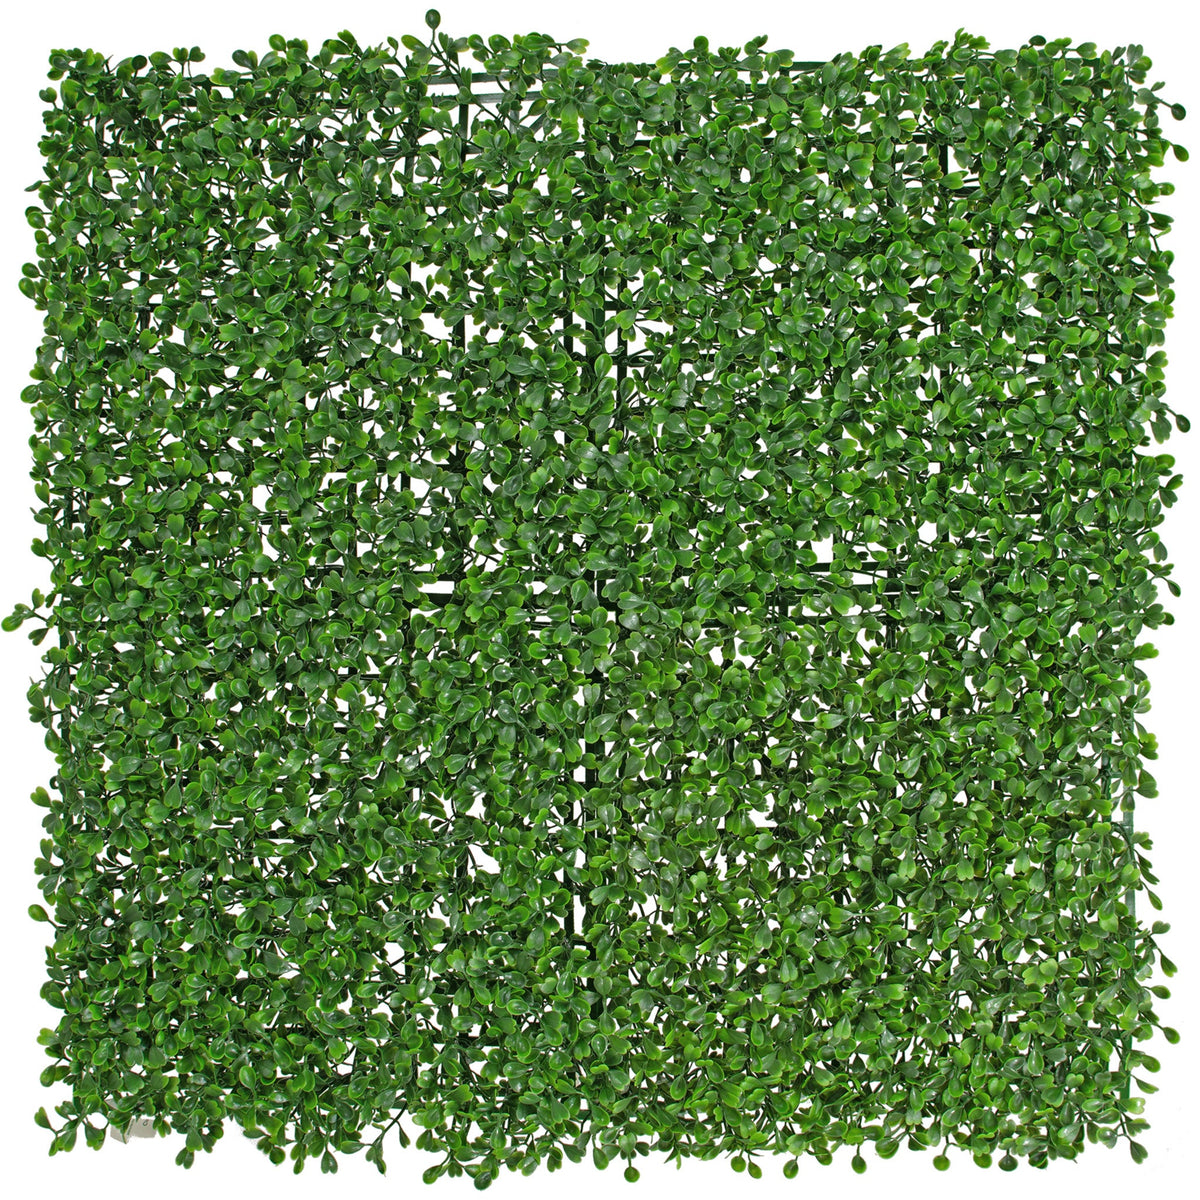 Introducing our Artificial Green Boxwood Wall Panels and Topiary Hedges.  Each panel measures 20in Width X 20in Length X 2in Thick.